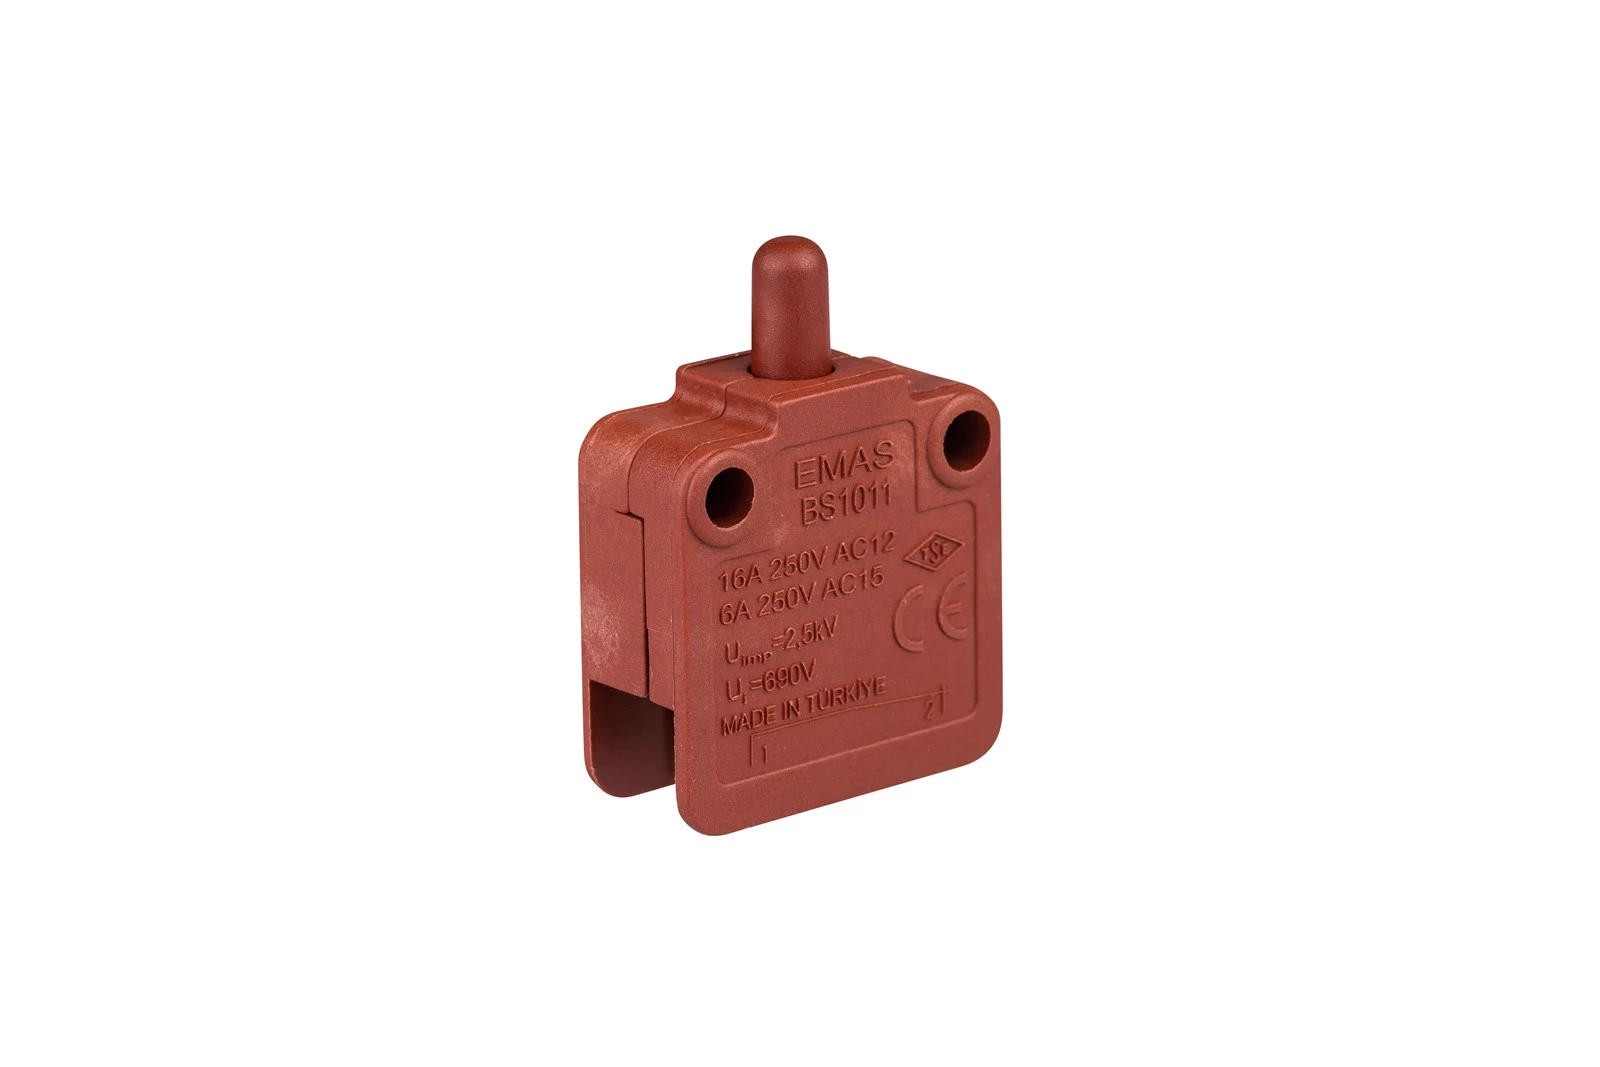 Touch push-button switch - CP200DK - EMAS - standard